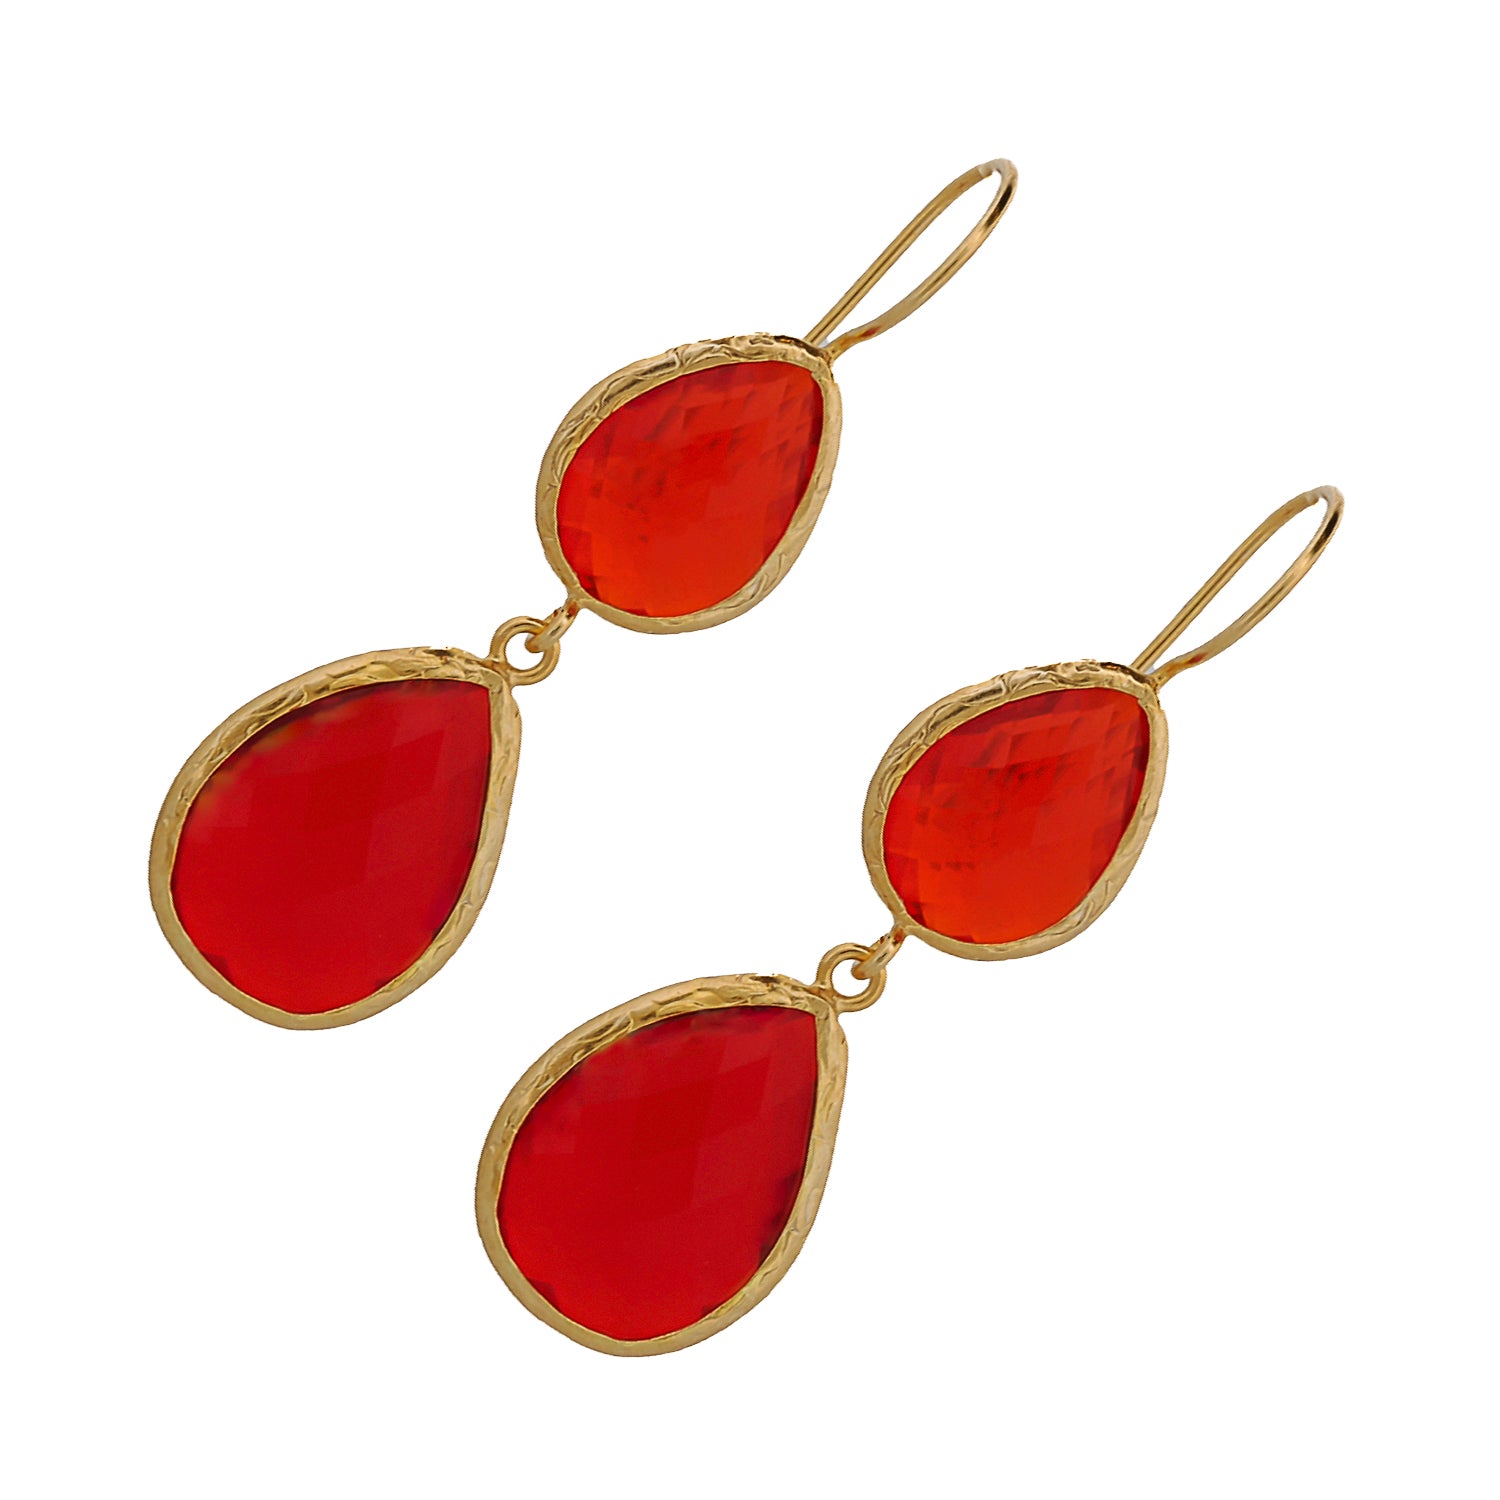 Festive Opulence: Double Red Stone Earrings in 18K Gold Plating and Sterling Silver